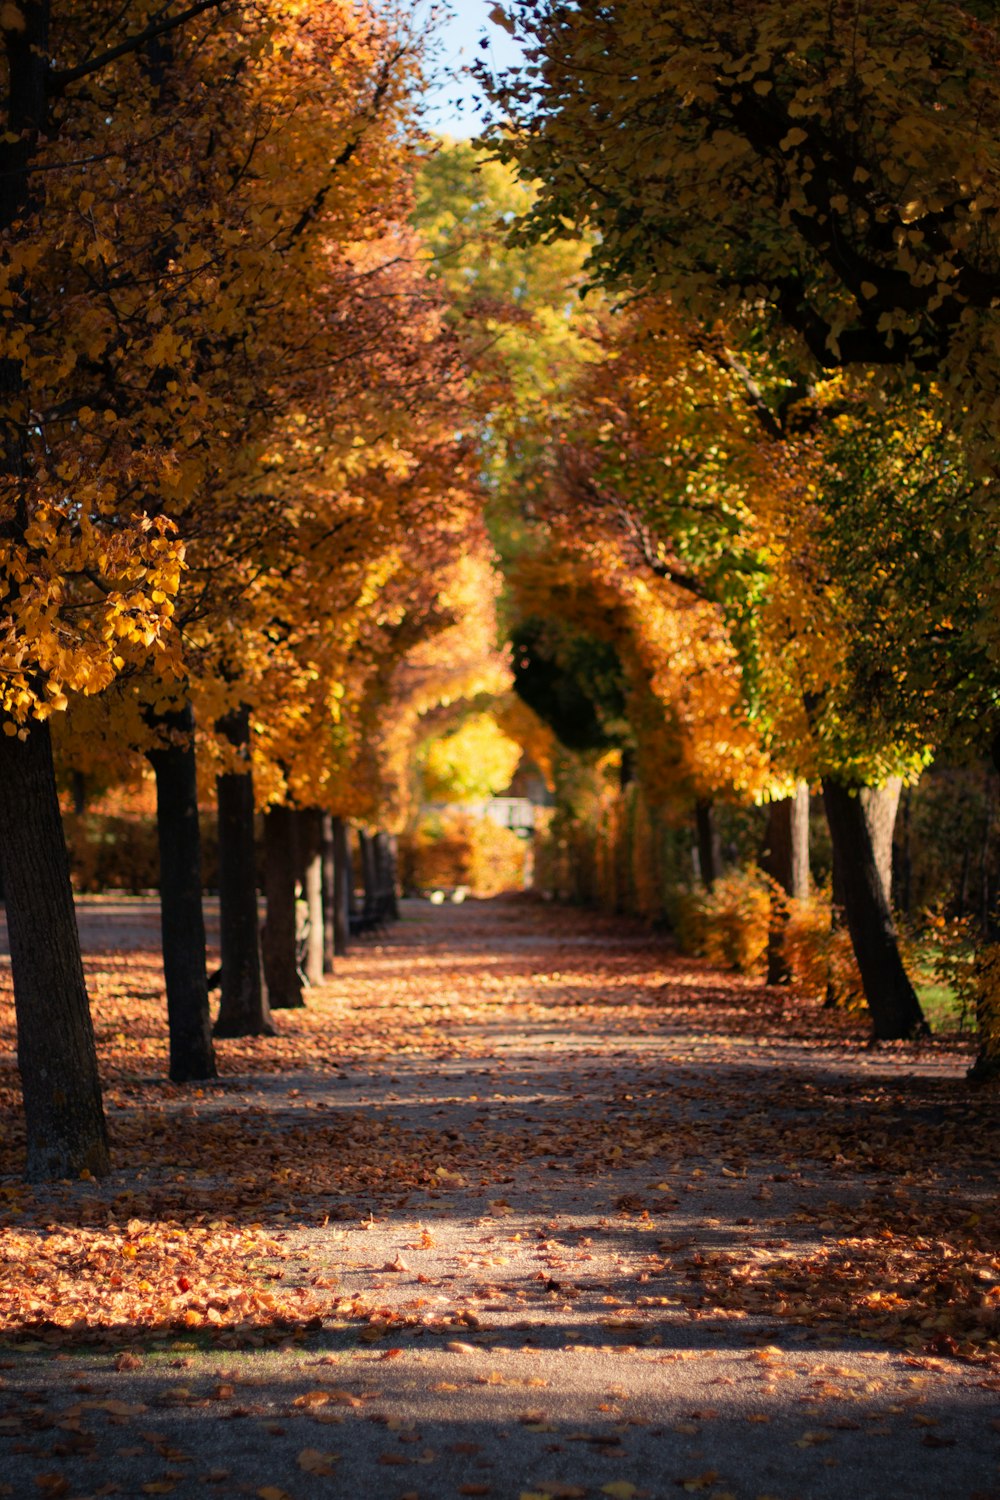 a road lined with trees with yellow and red leaves